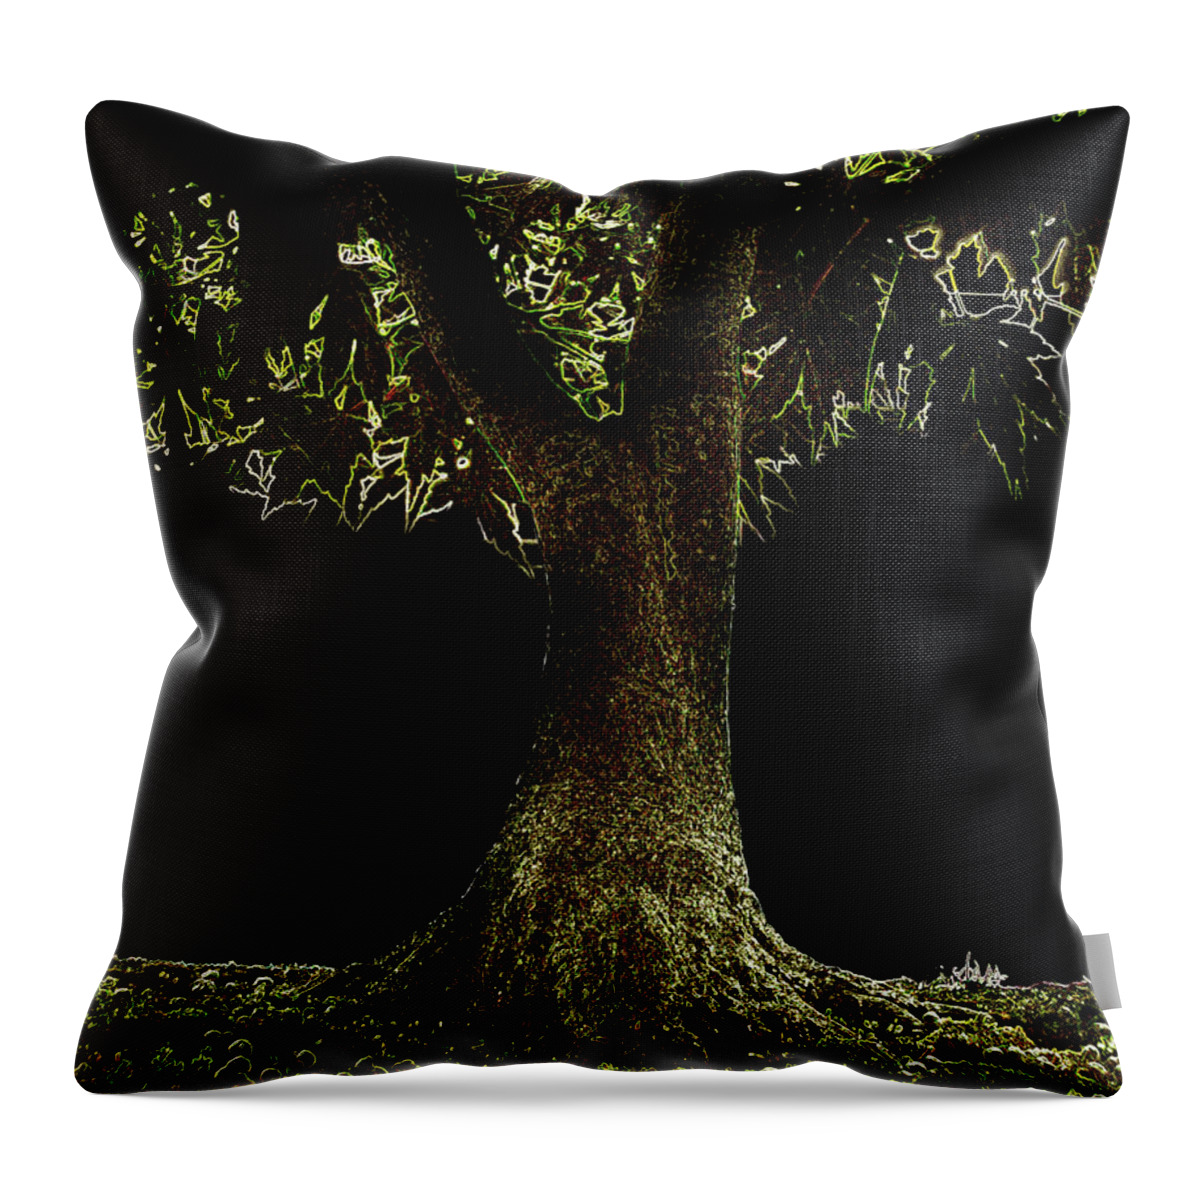 Outdoors Throw Pillow featuring the photograph Bonsai Tree With Moss At Night by Michael Duva